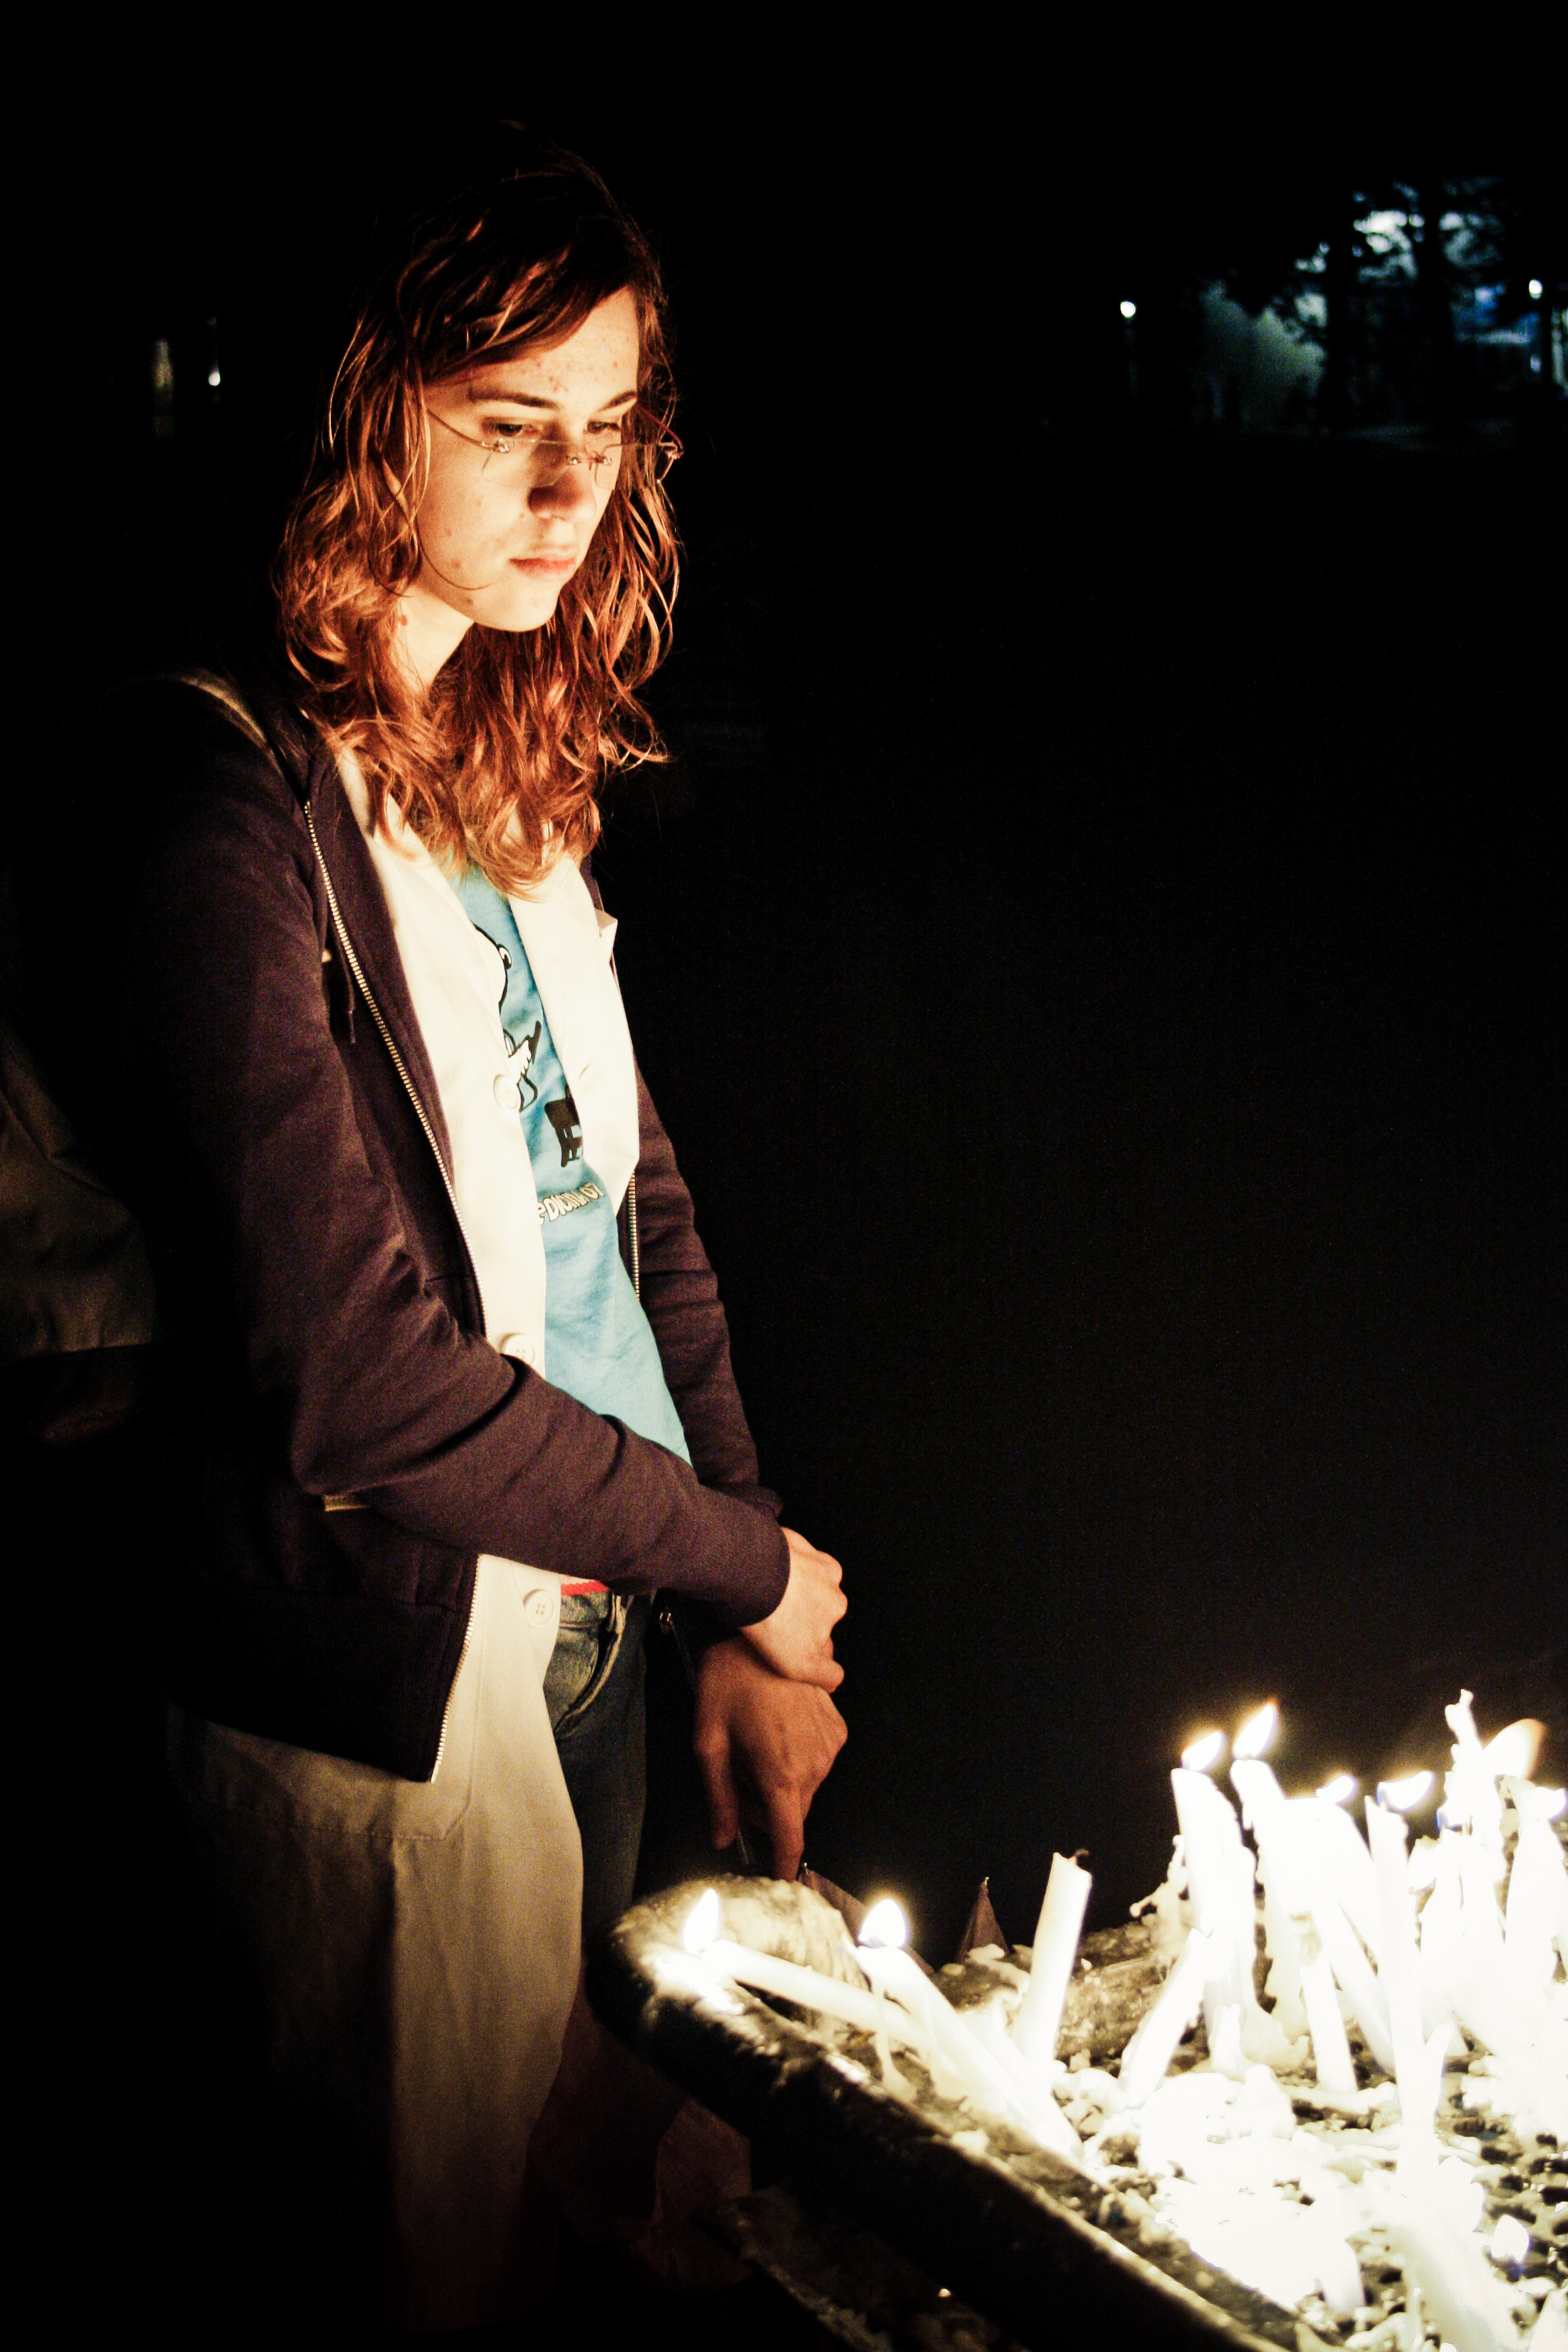 Girl lighting candle, Burning, Woman, Thinking, Standing, HQ Photo